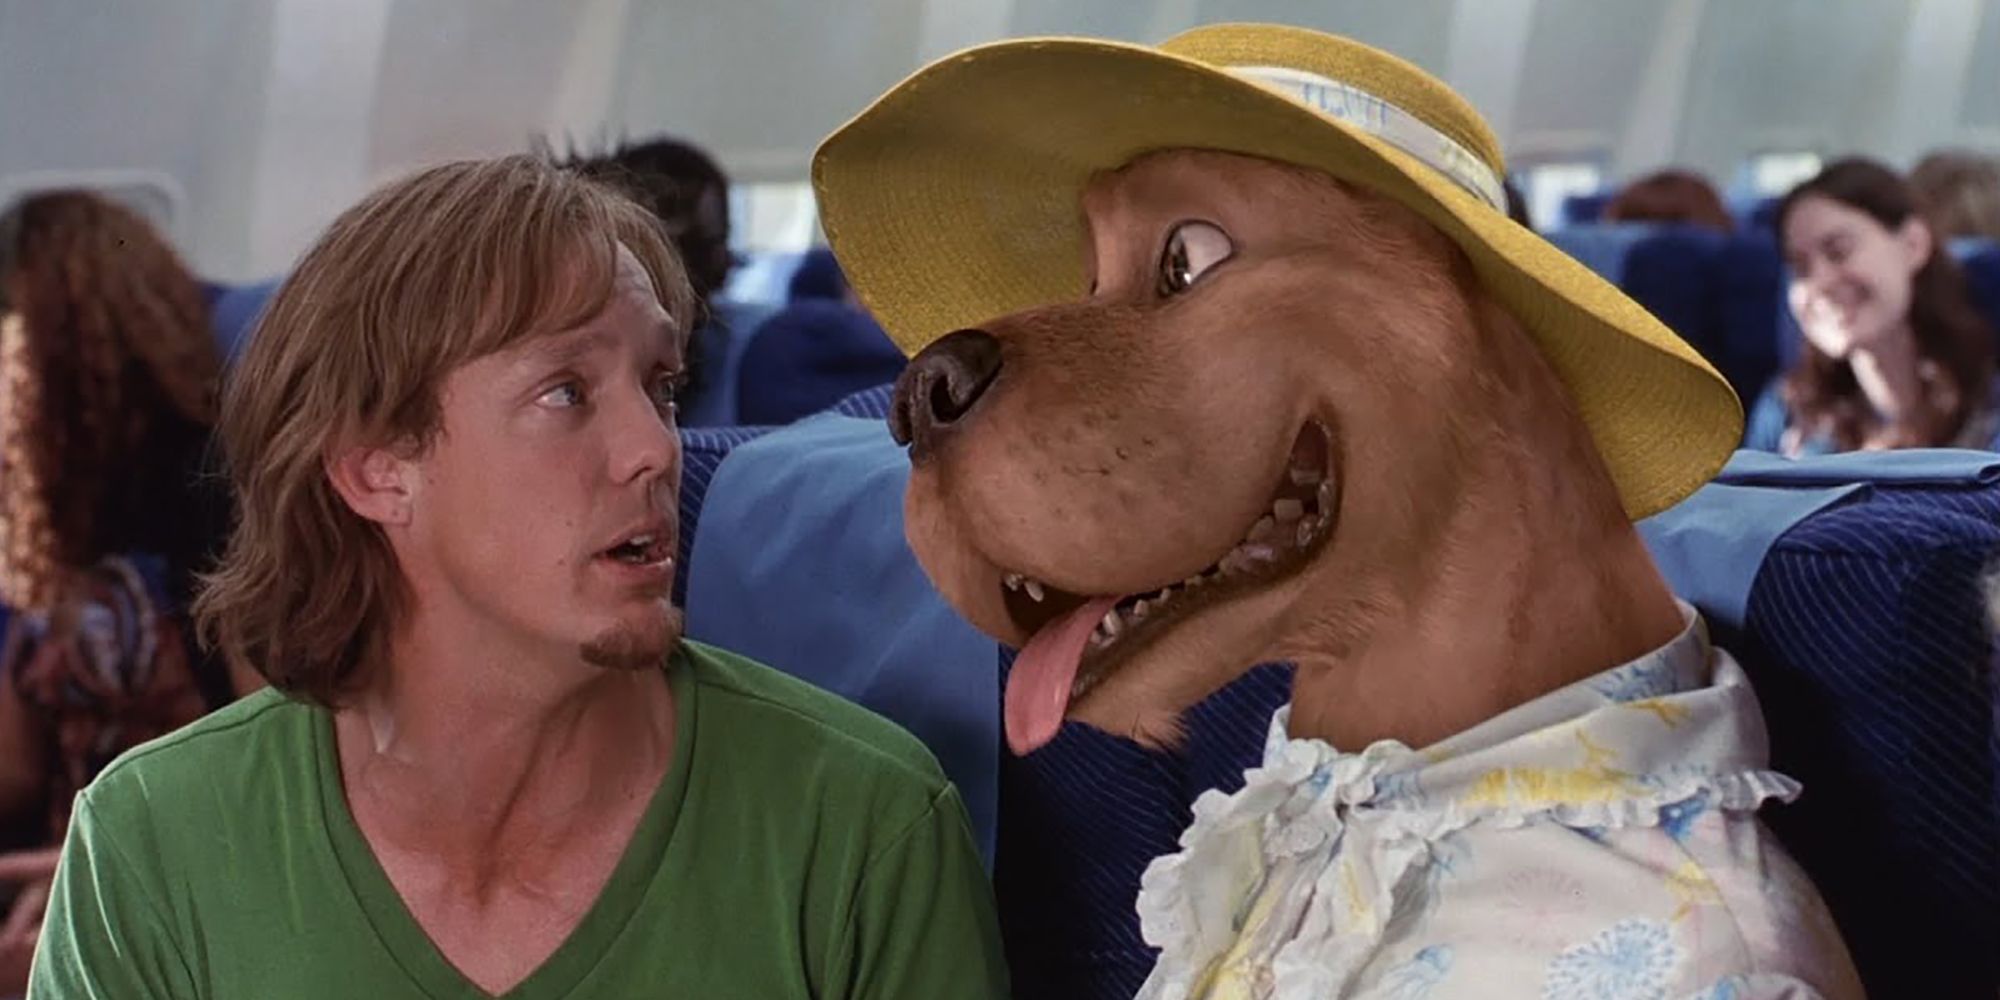 Scooby And Shaggy In Scooby-Doo 2002